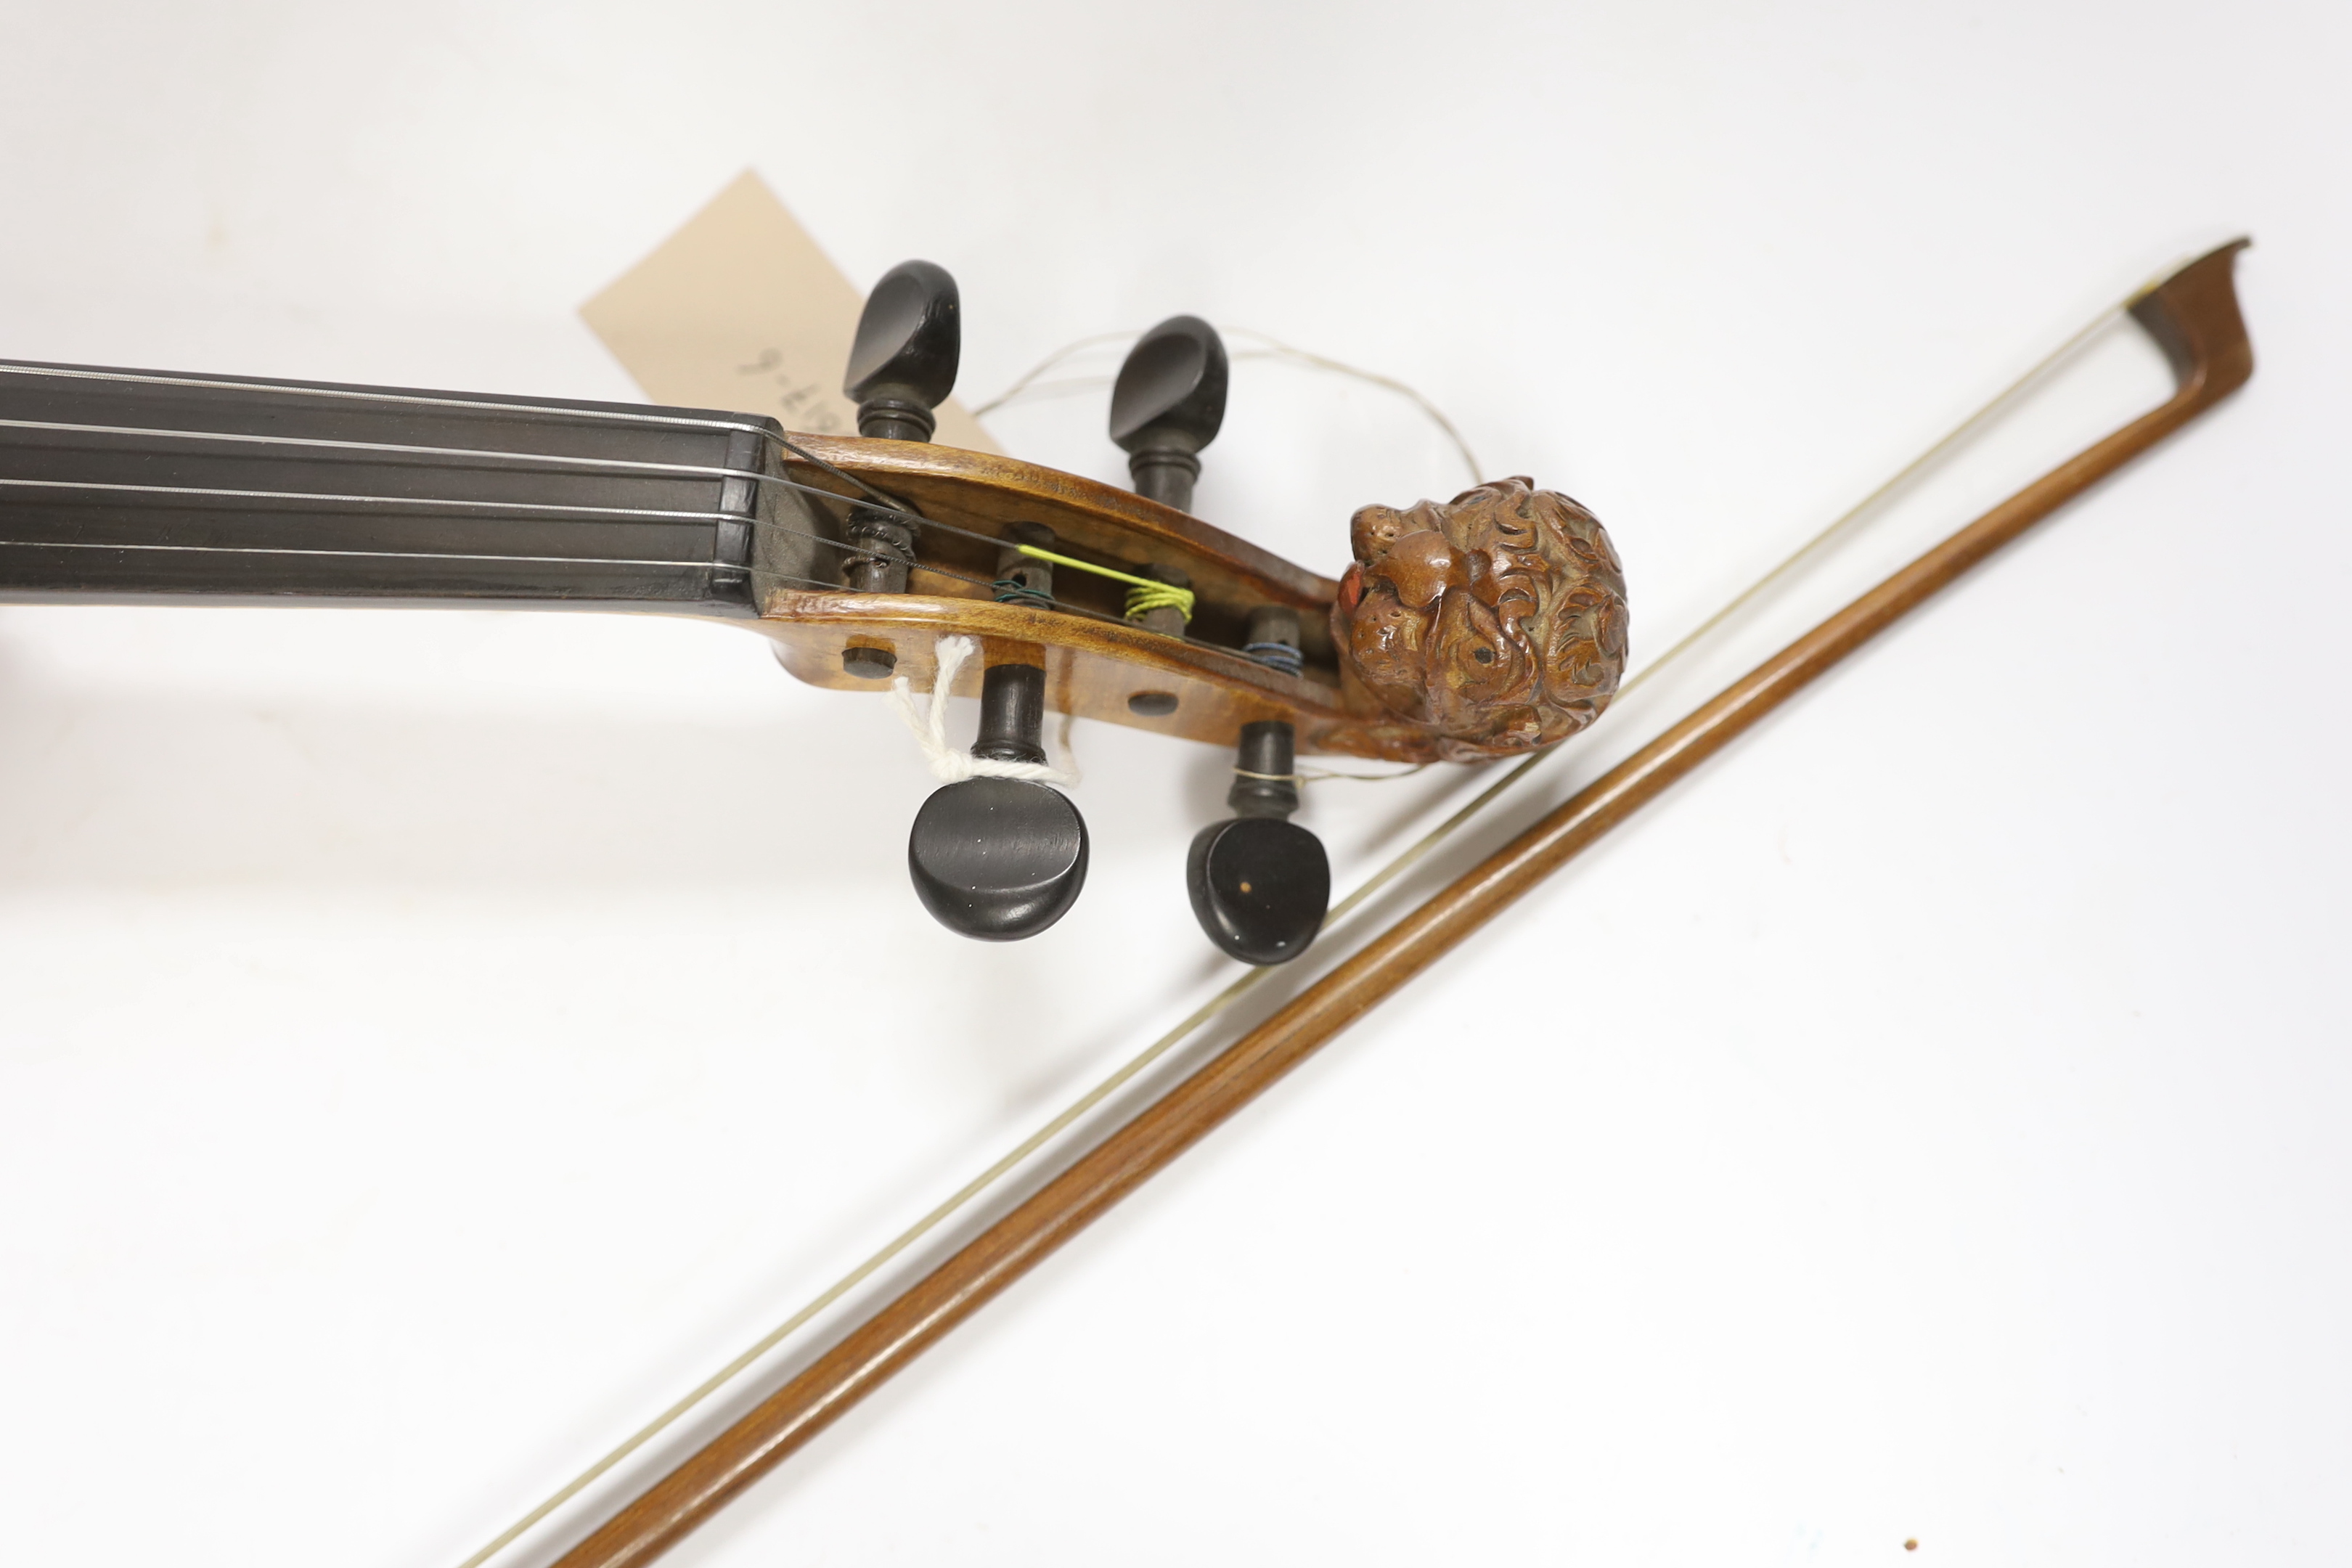 A 'travelling' violin and bow, the violin with grotesque head scroll carving, body 30.5cm